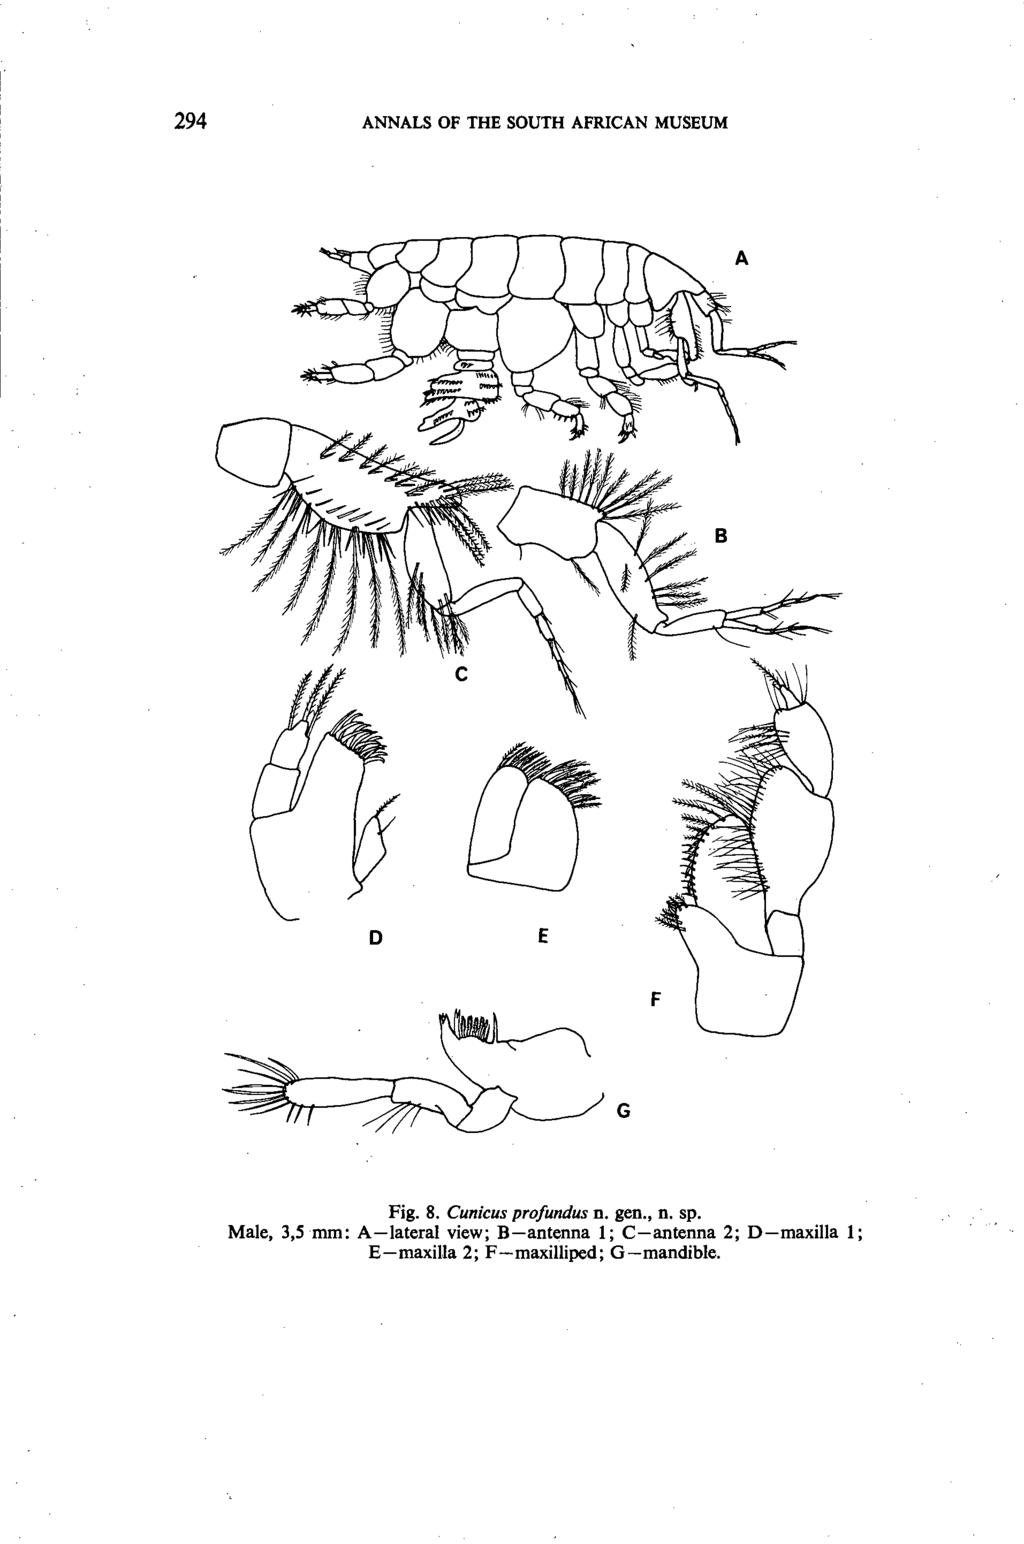 294 ANNALS OF THE SOUTH AFRICAN MUSEUM o E G Fig. 8. Cunicus profundus n. gen., n. sp.